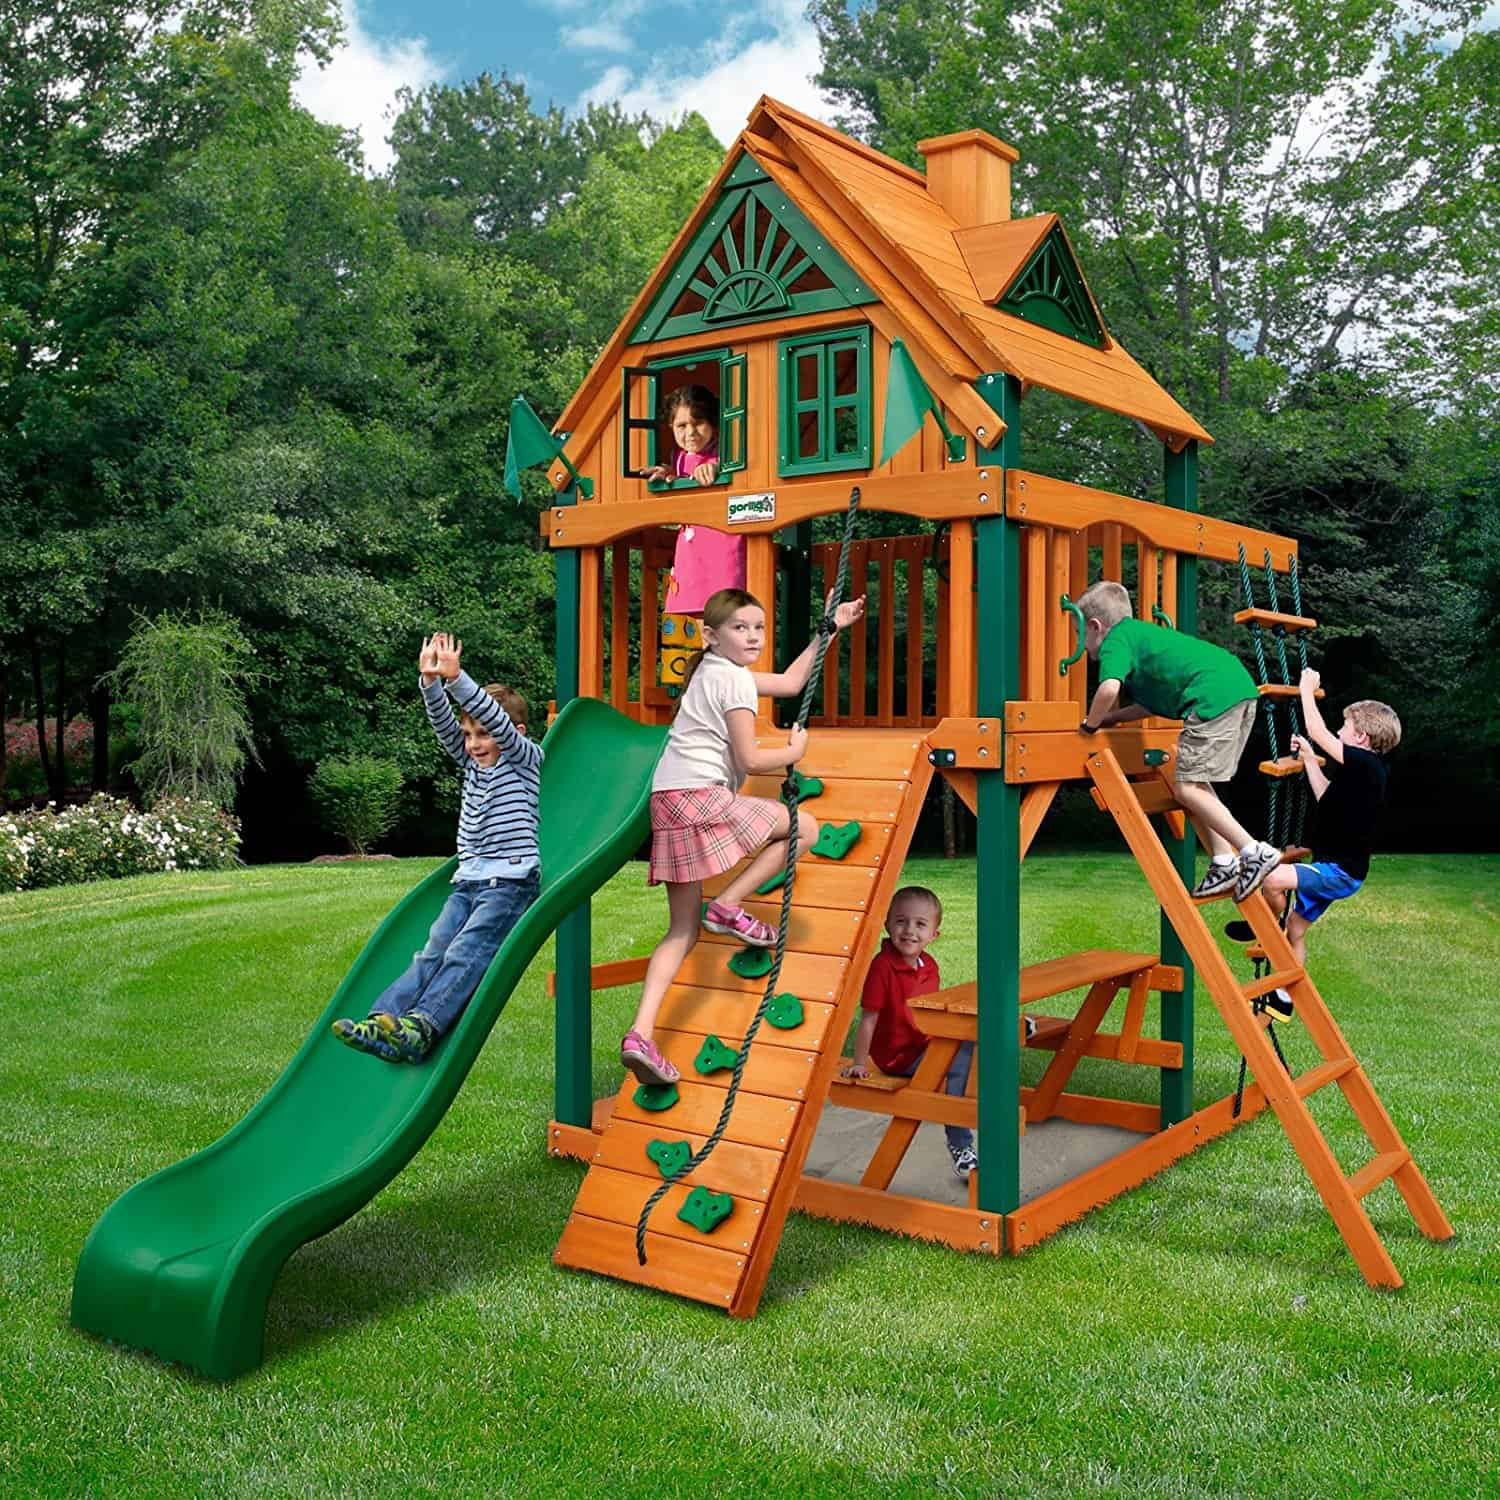 Outdoor Playsets For Kids
 Swing Sets for Small Yards The Backyard Site